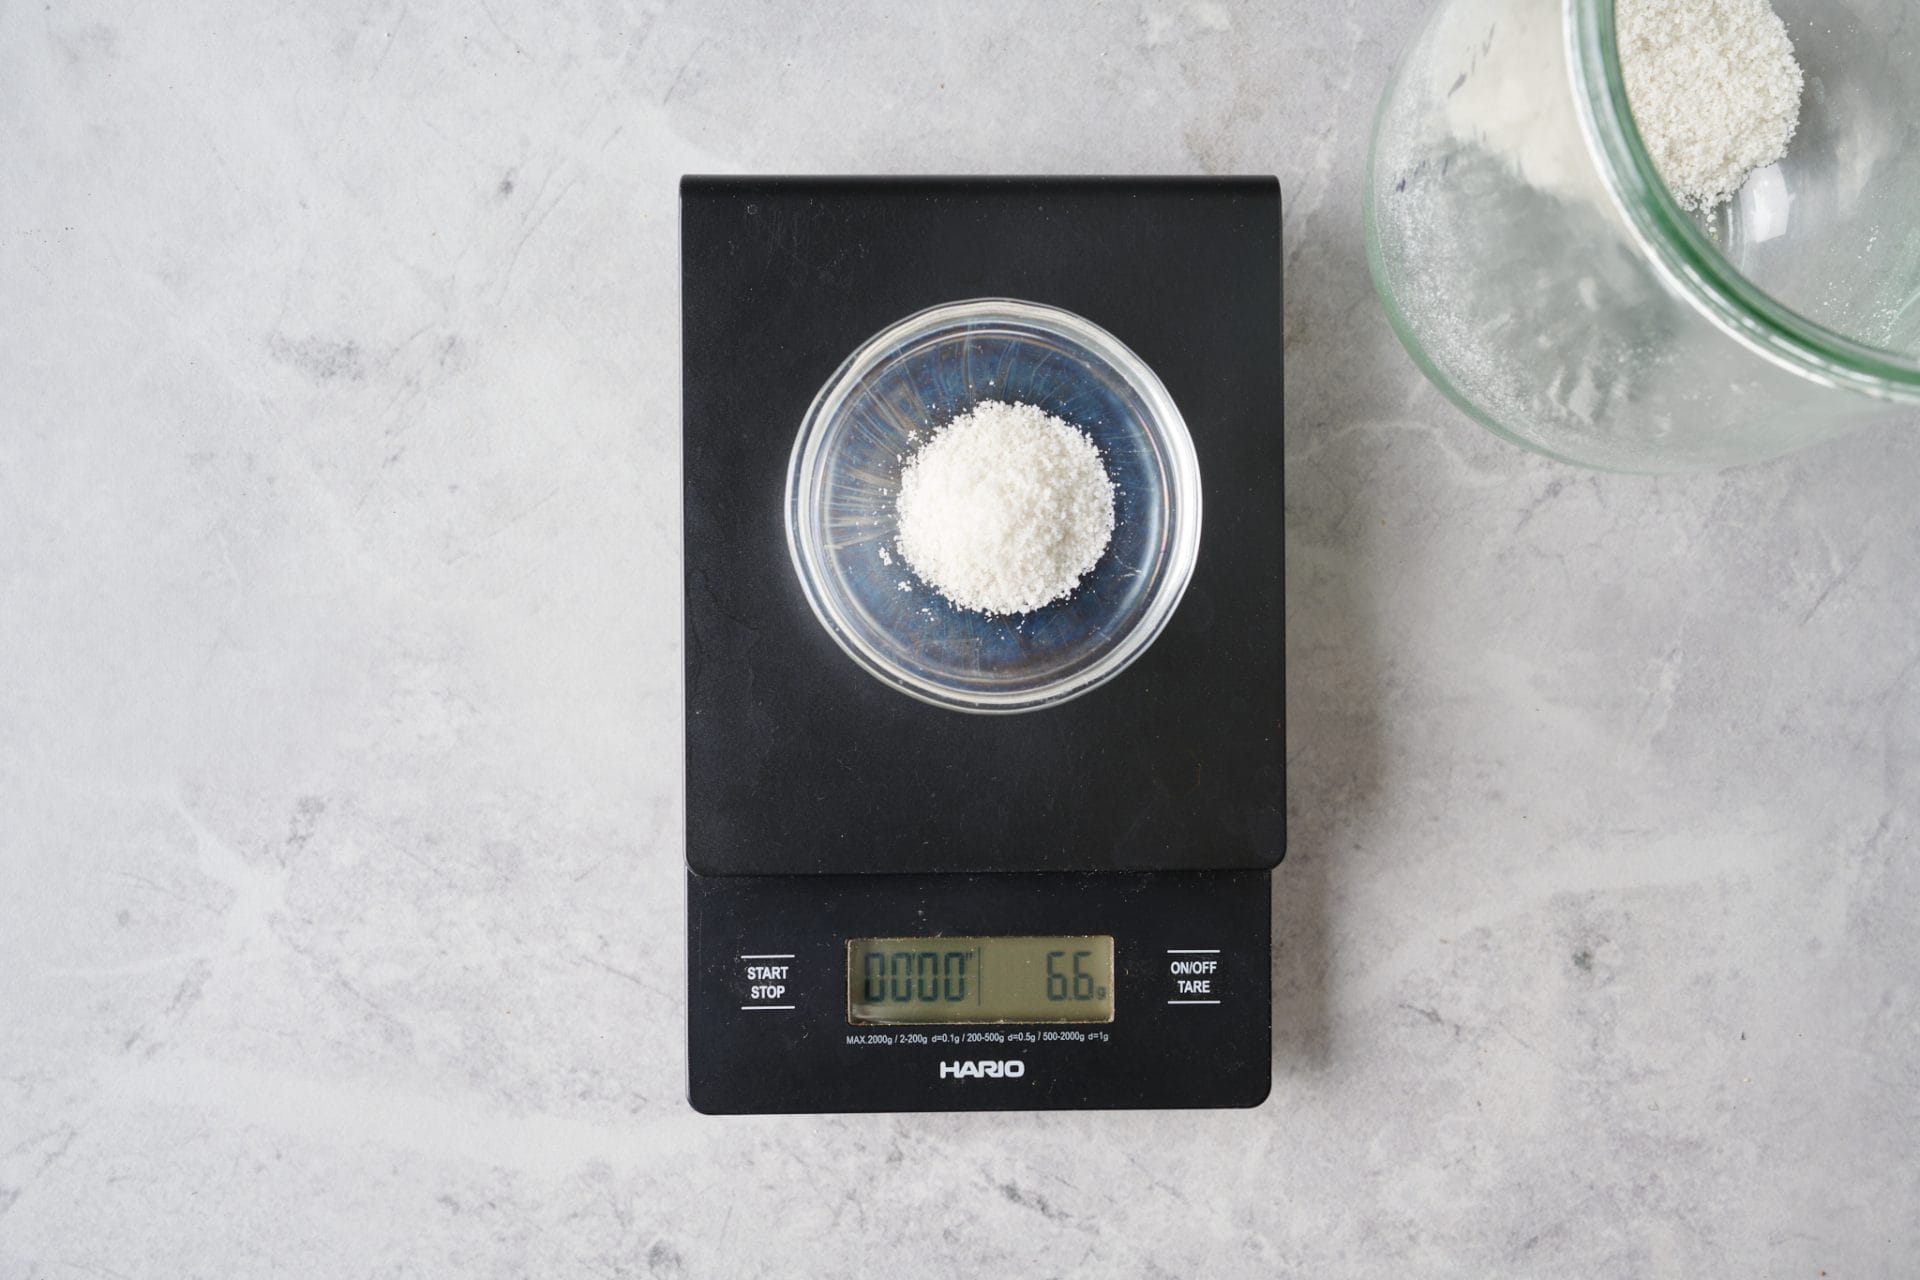 Using the Hario coffee scale to weigh salt.